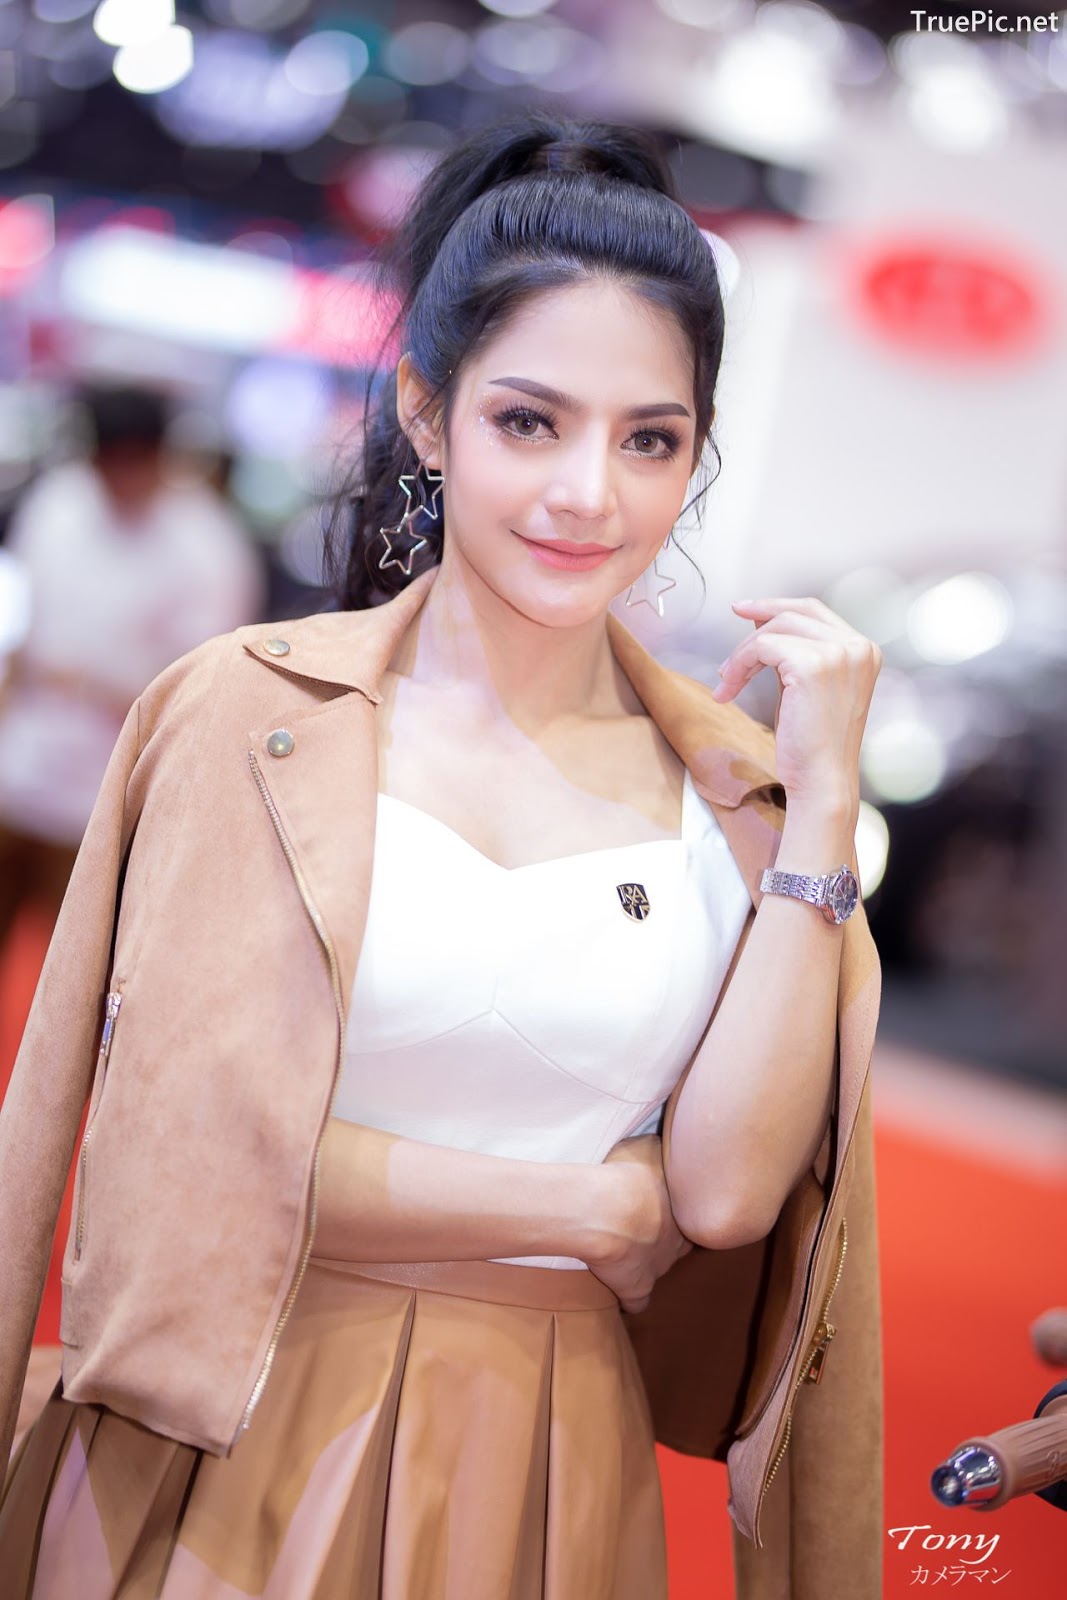 Image-Thailand-Hot-Model-Thai-Racing-Girl-At-Motor-Show-2019-TruePic.net- Picture-35